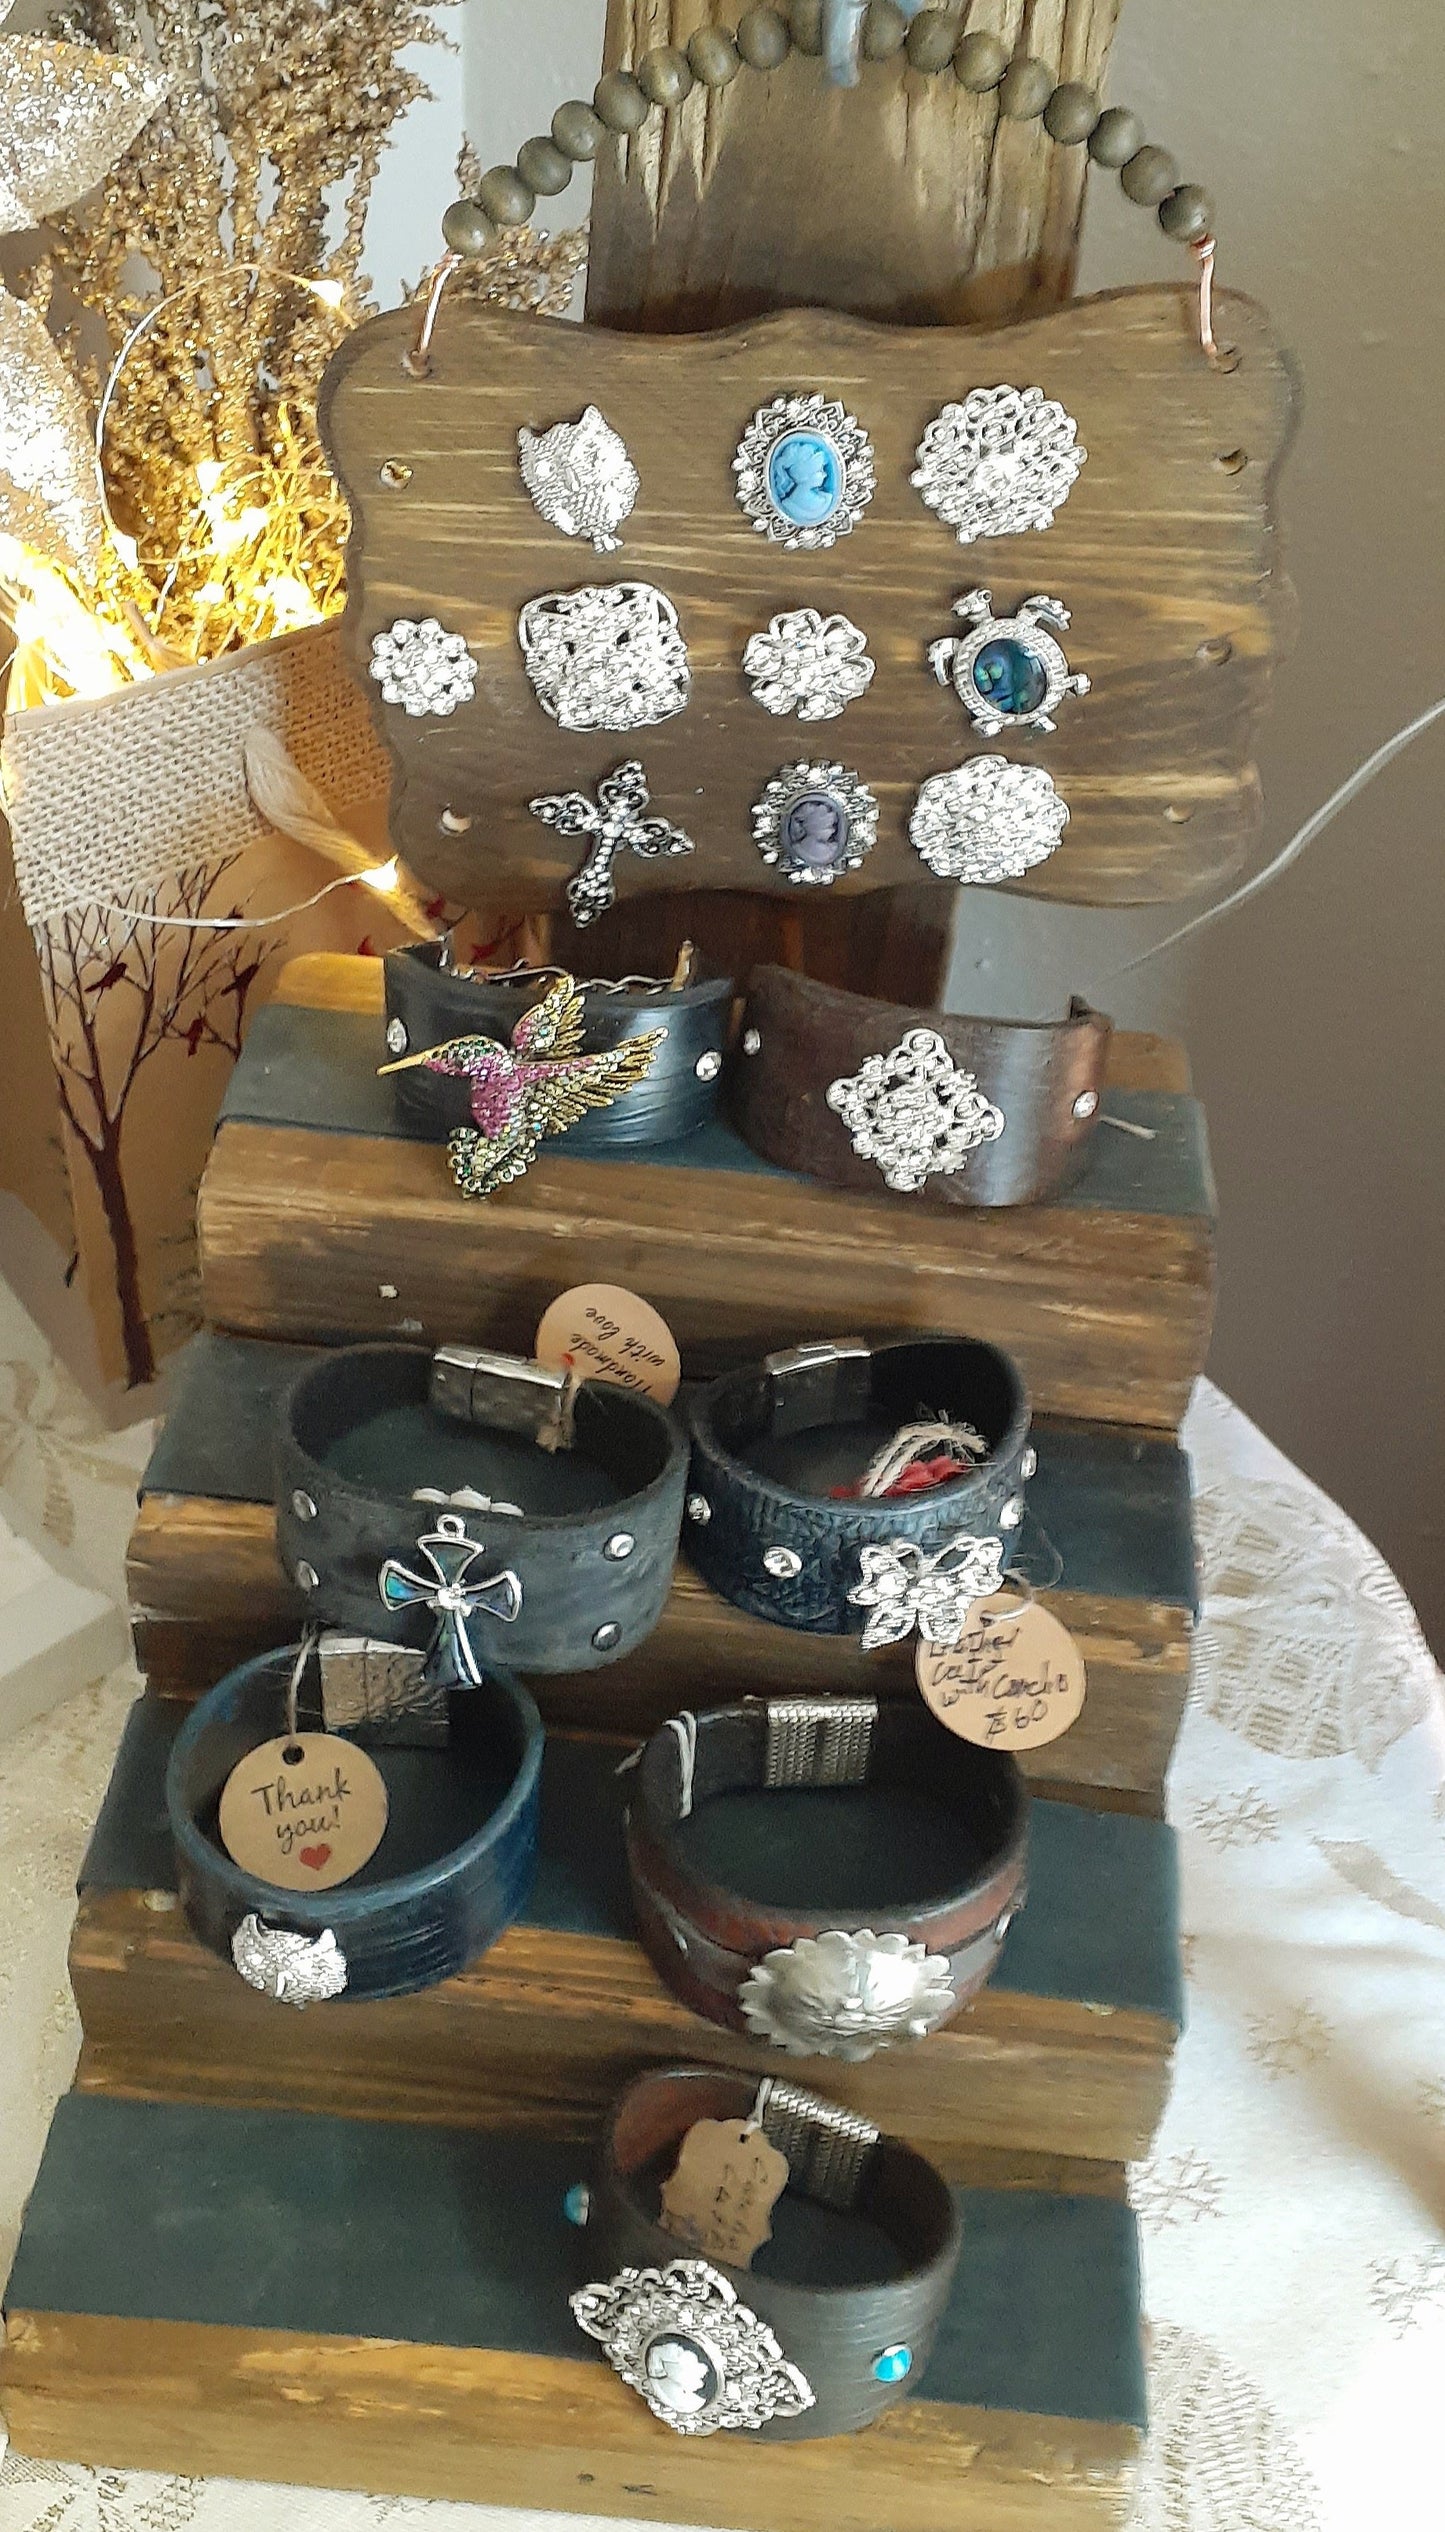 Leather Cuffs and large Display |WRD - WarmRainyDay